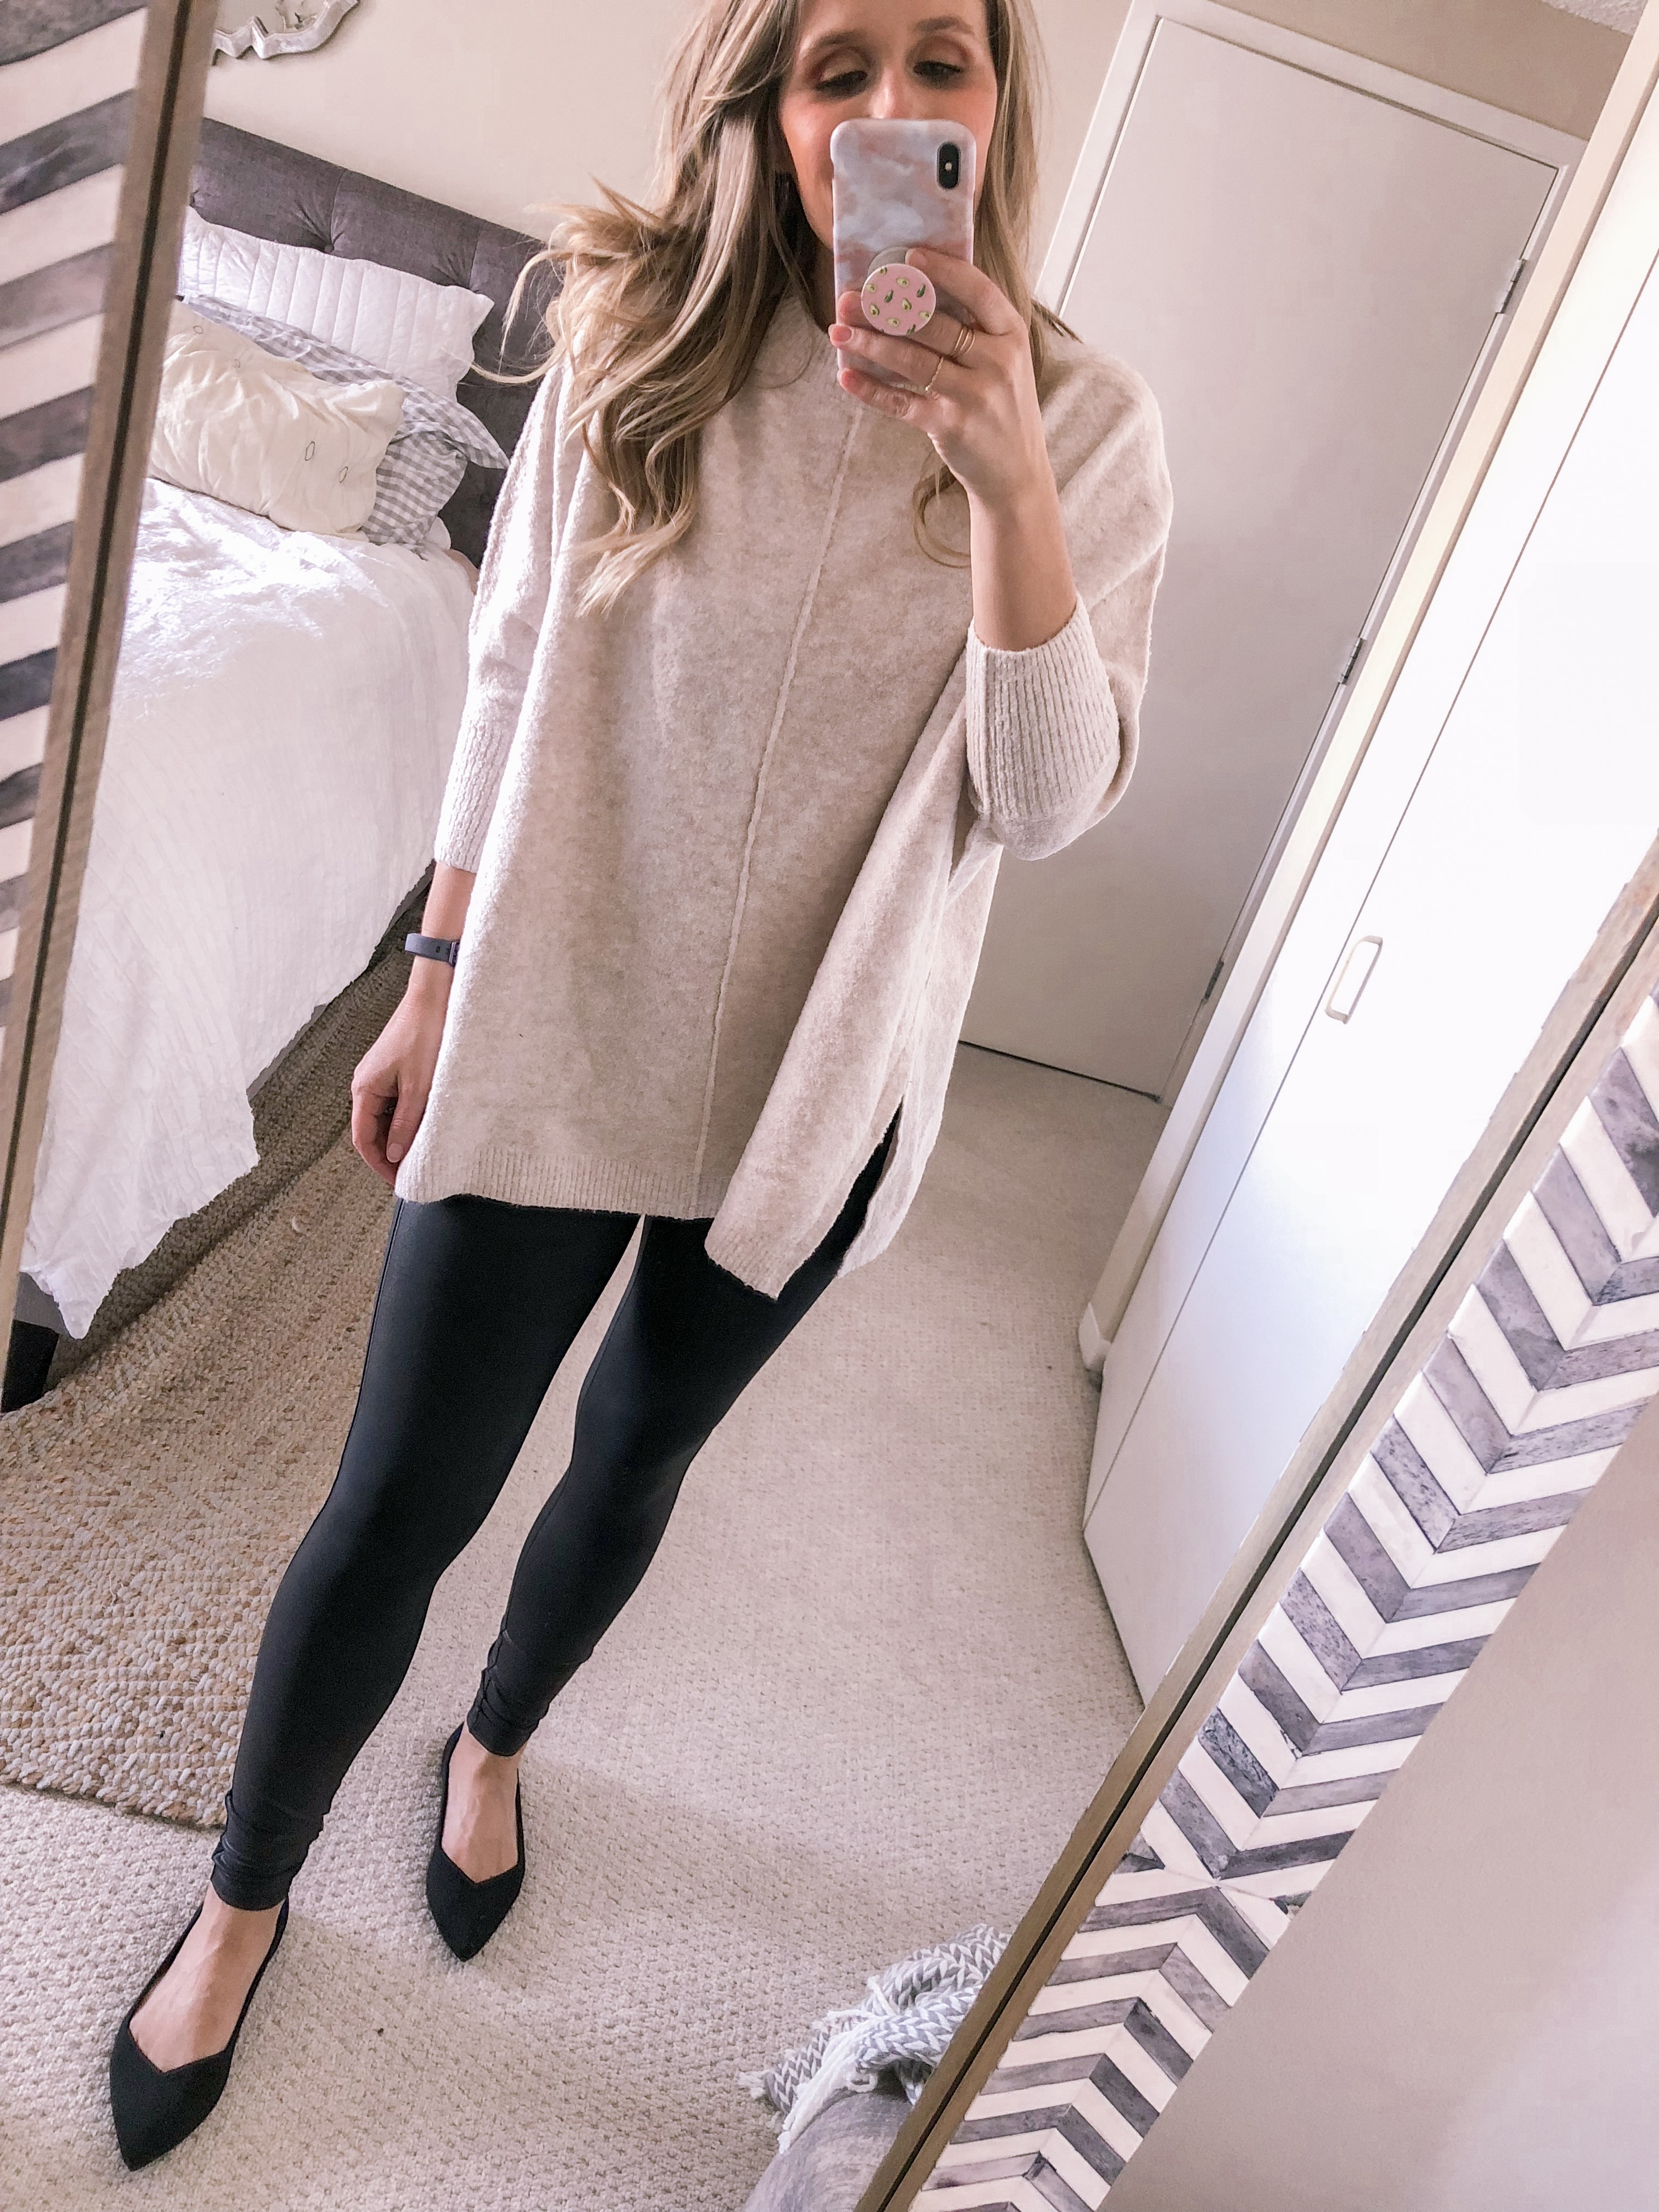 Chicago fashion blogger Visions of Vogue styles a neutral sweater with spanx faux leather leggings and Rothy's flats for a work office outfit idea.